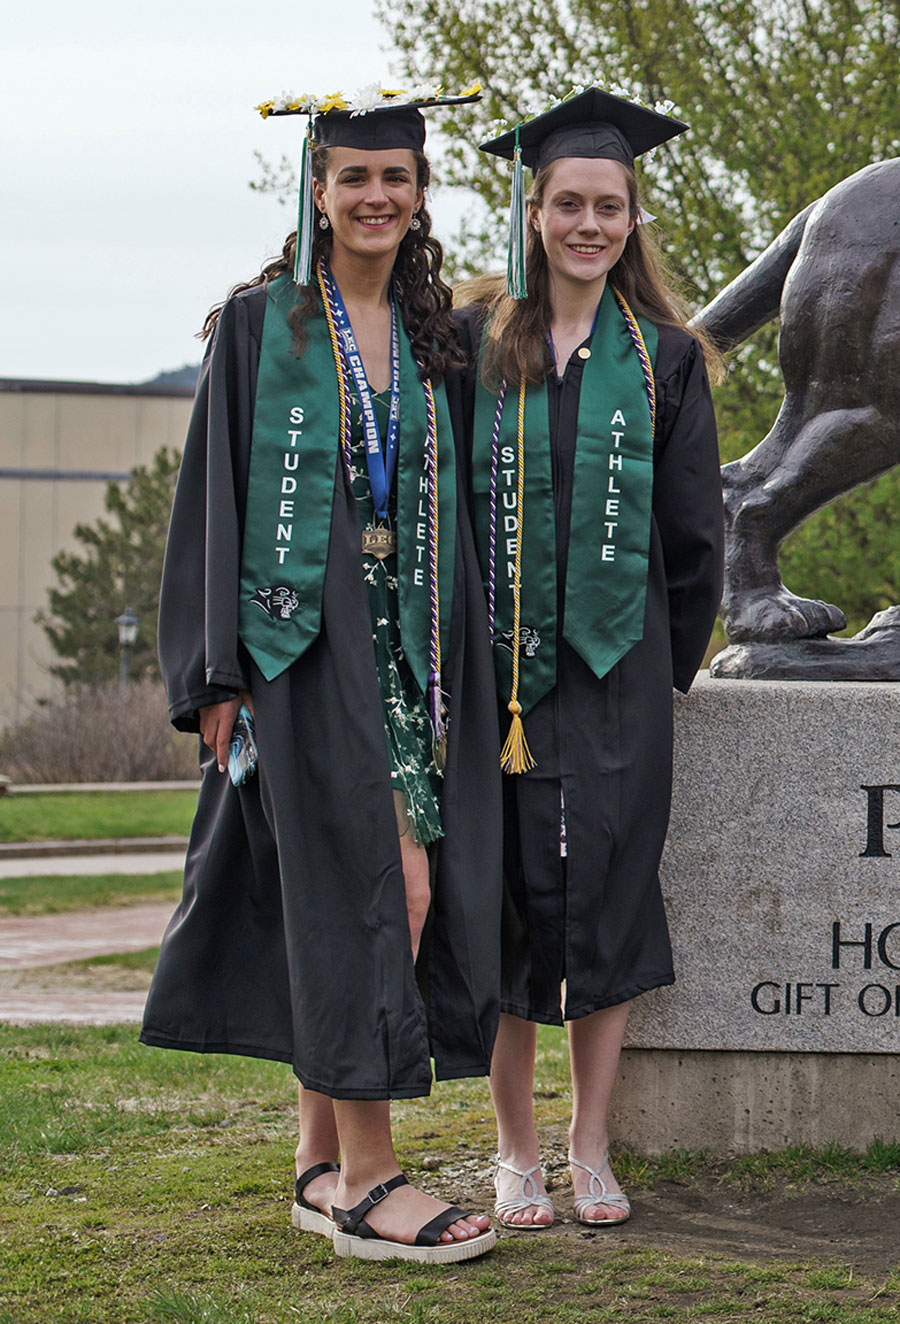 Graduates standing near school sign posing for picture